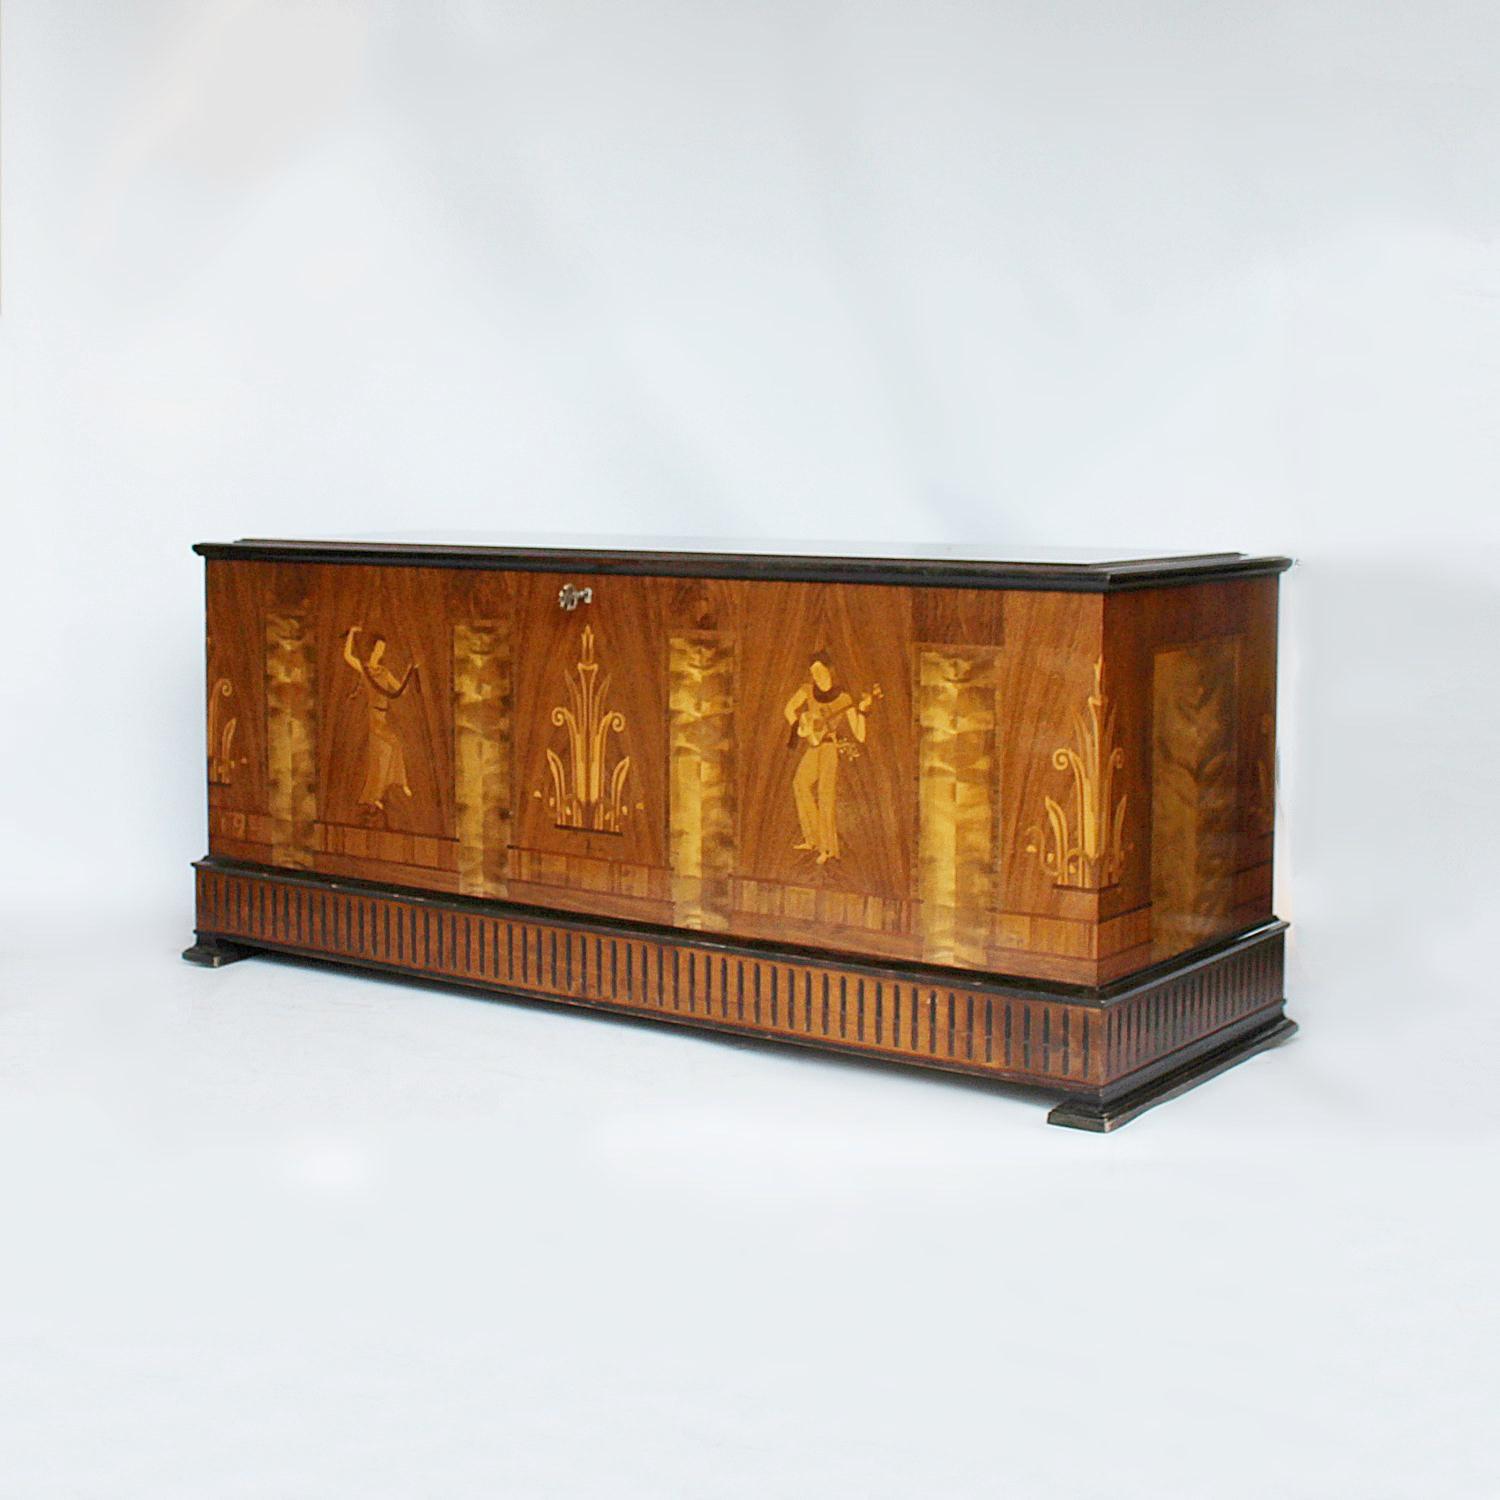 An Art Deco chest with inlaid design to front and corners in a variety of woods - boxwood, Macassar ebony, straight grain walnut, satinwood. Carved base and feet. Mahogany interior with integral shelving. Dated 1937 to front.
 